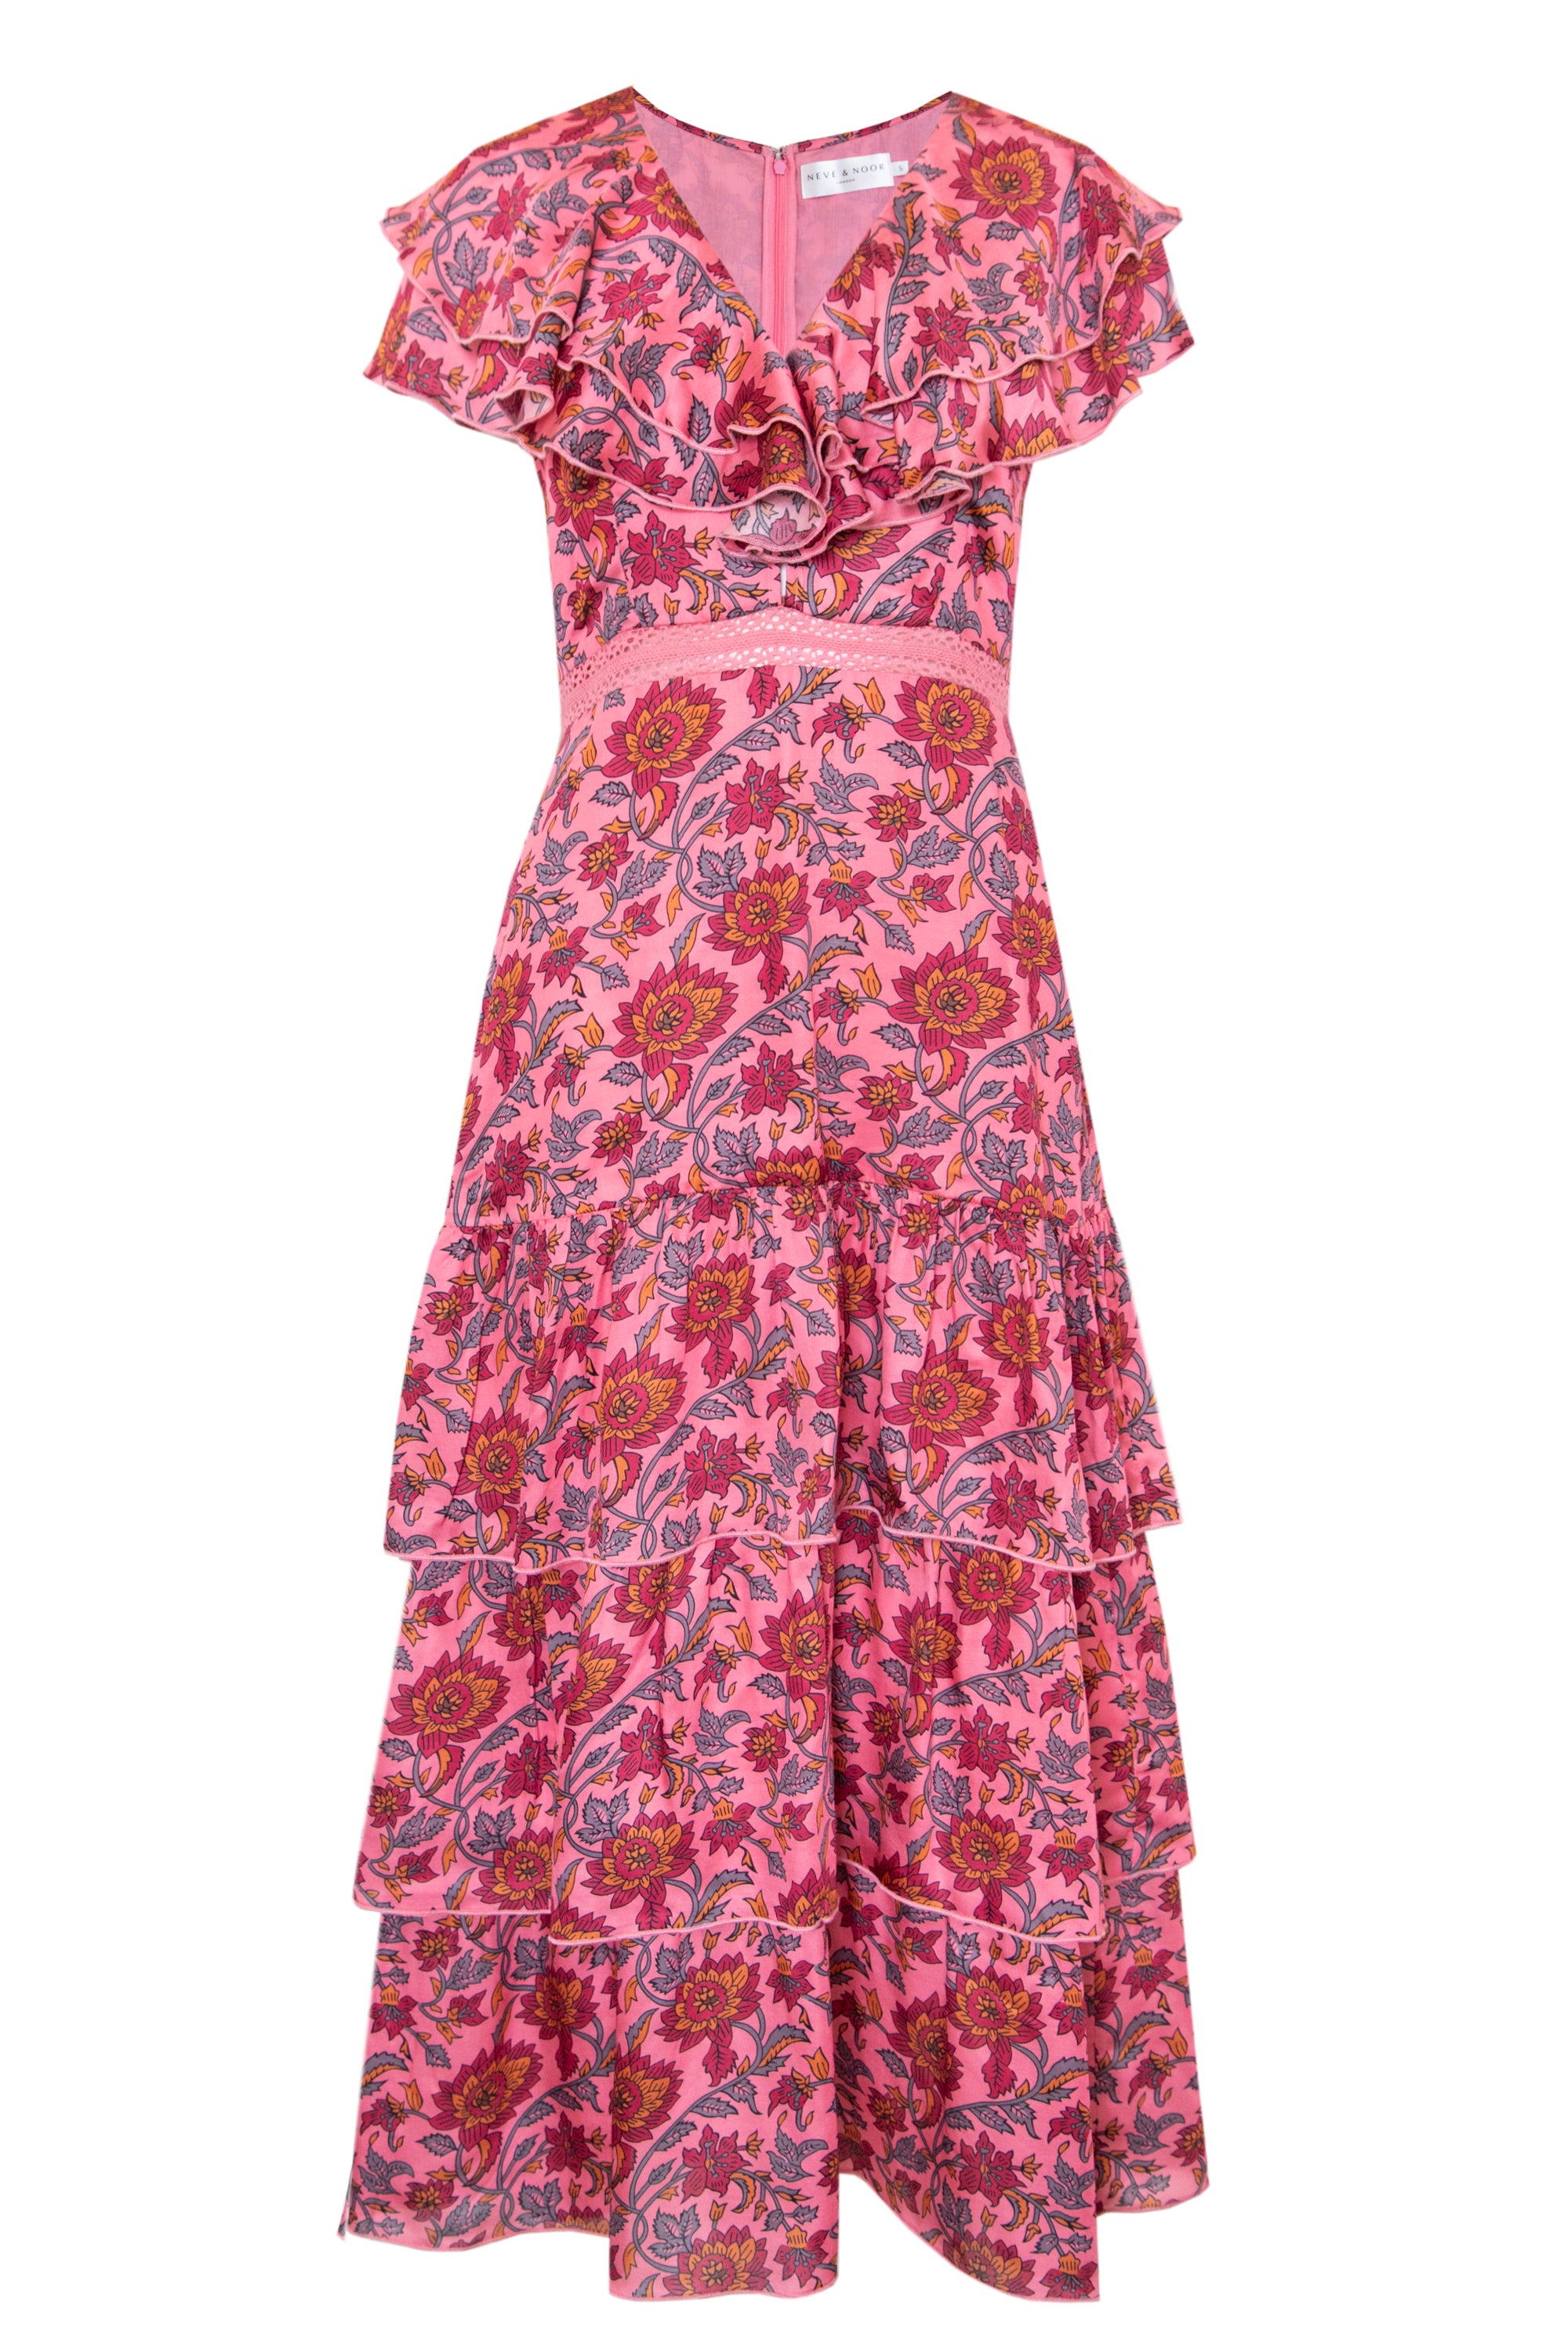 Pink ruffle midi dress with triple tiered skirt empire line and overall floral pattern